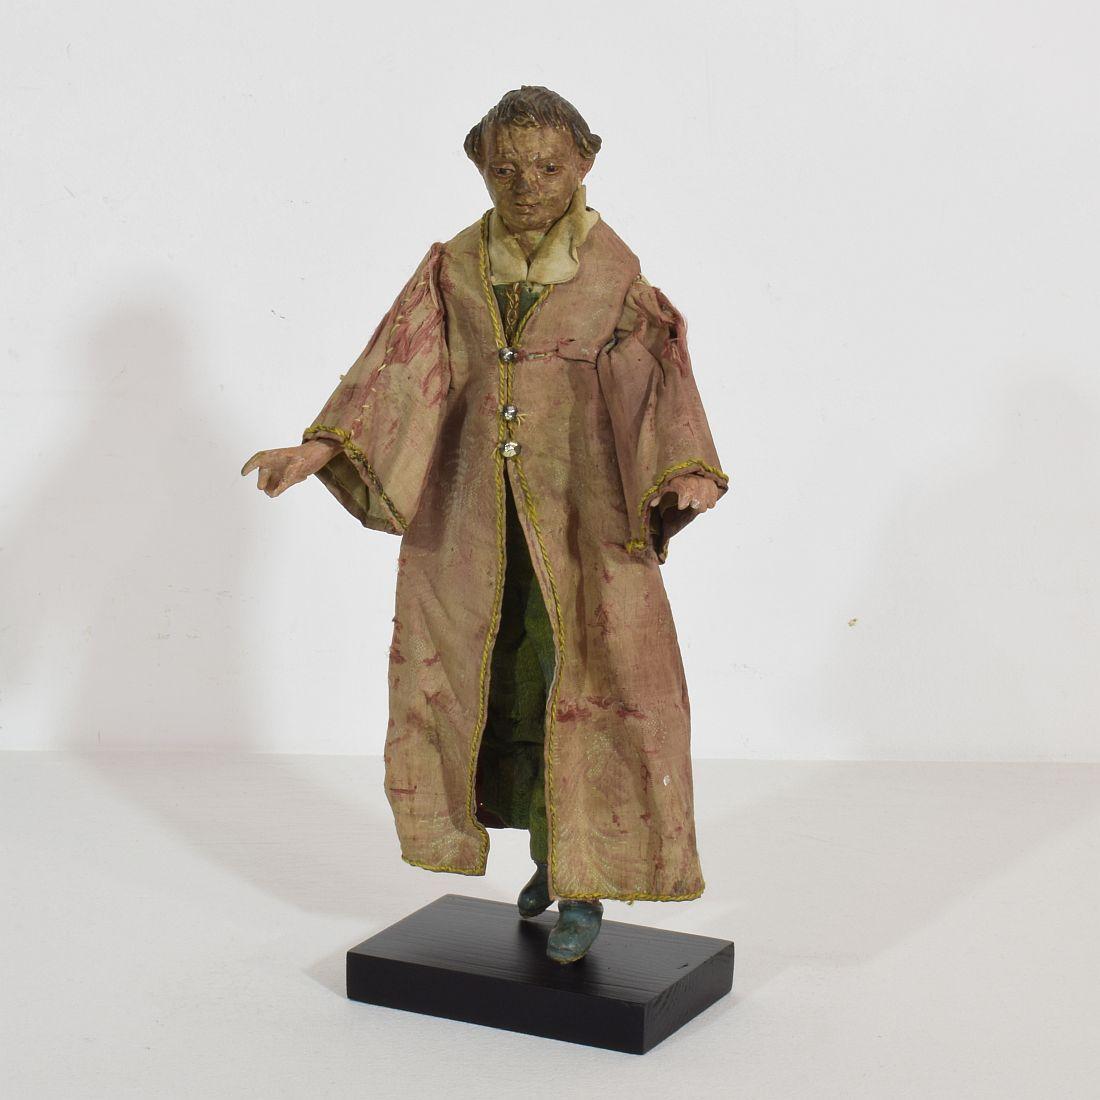 Very nice saint figure. Terracotta with wood and original fabric.
Italy, circa 1750-1850. Weathered, small losses.
Measurements include the wooden base.
More photo's available on request.